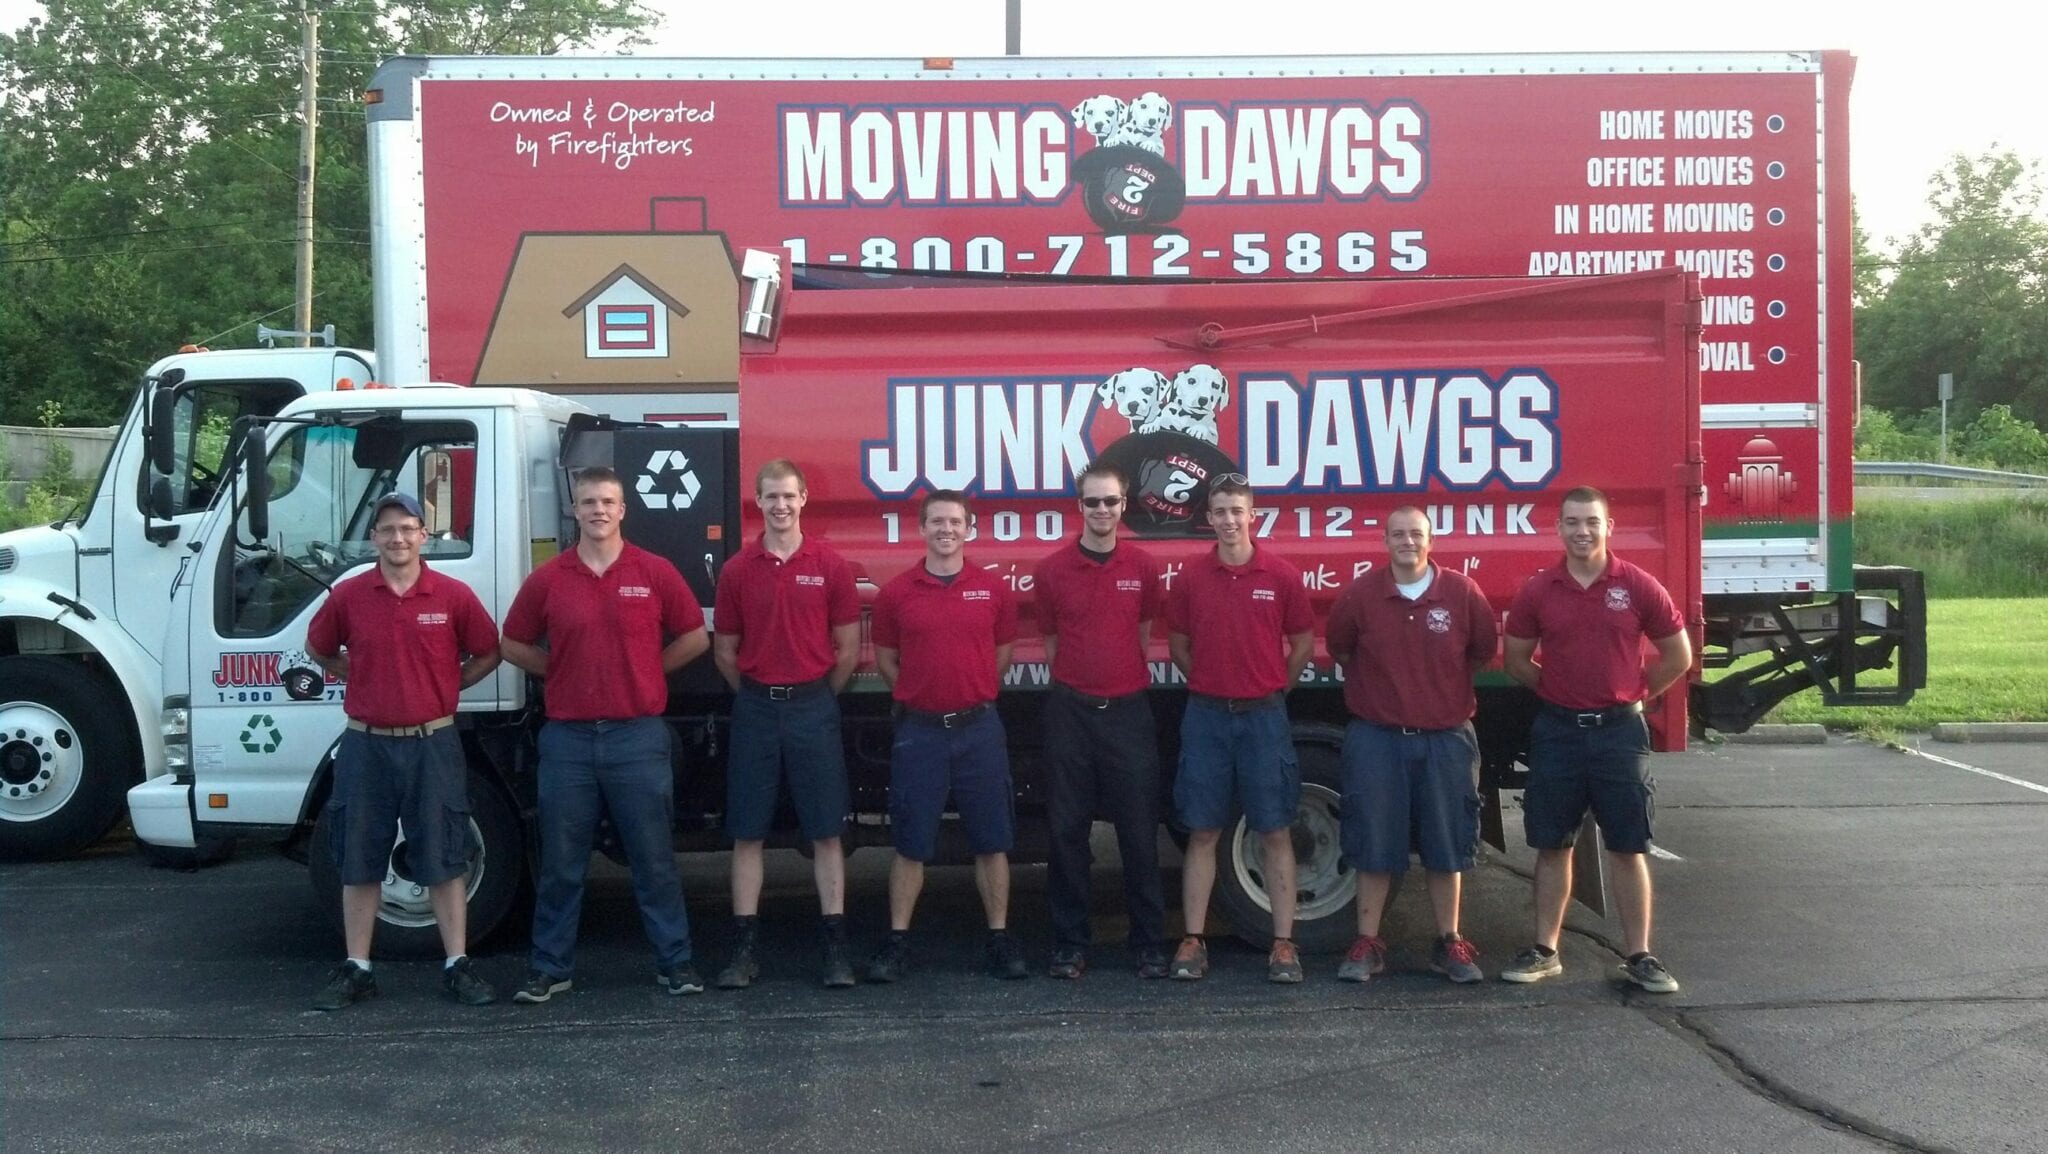 Who will pick up junk in Carmel? |Fire Dawgs Junk Removal